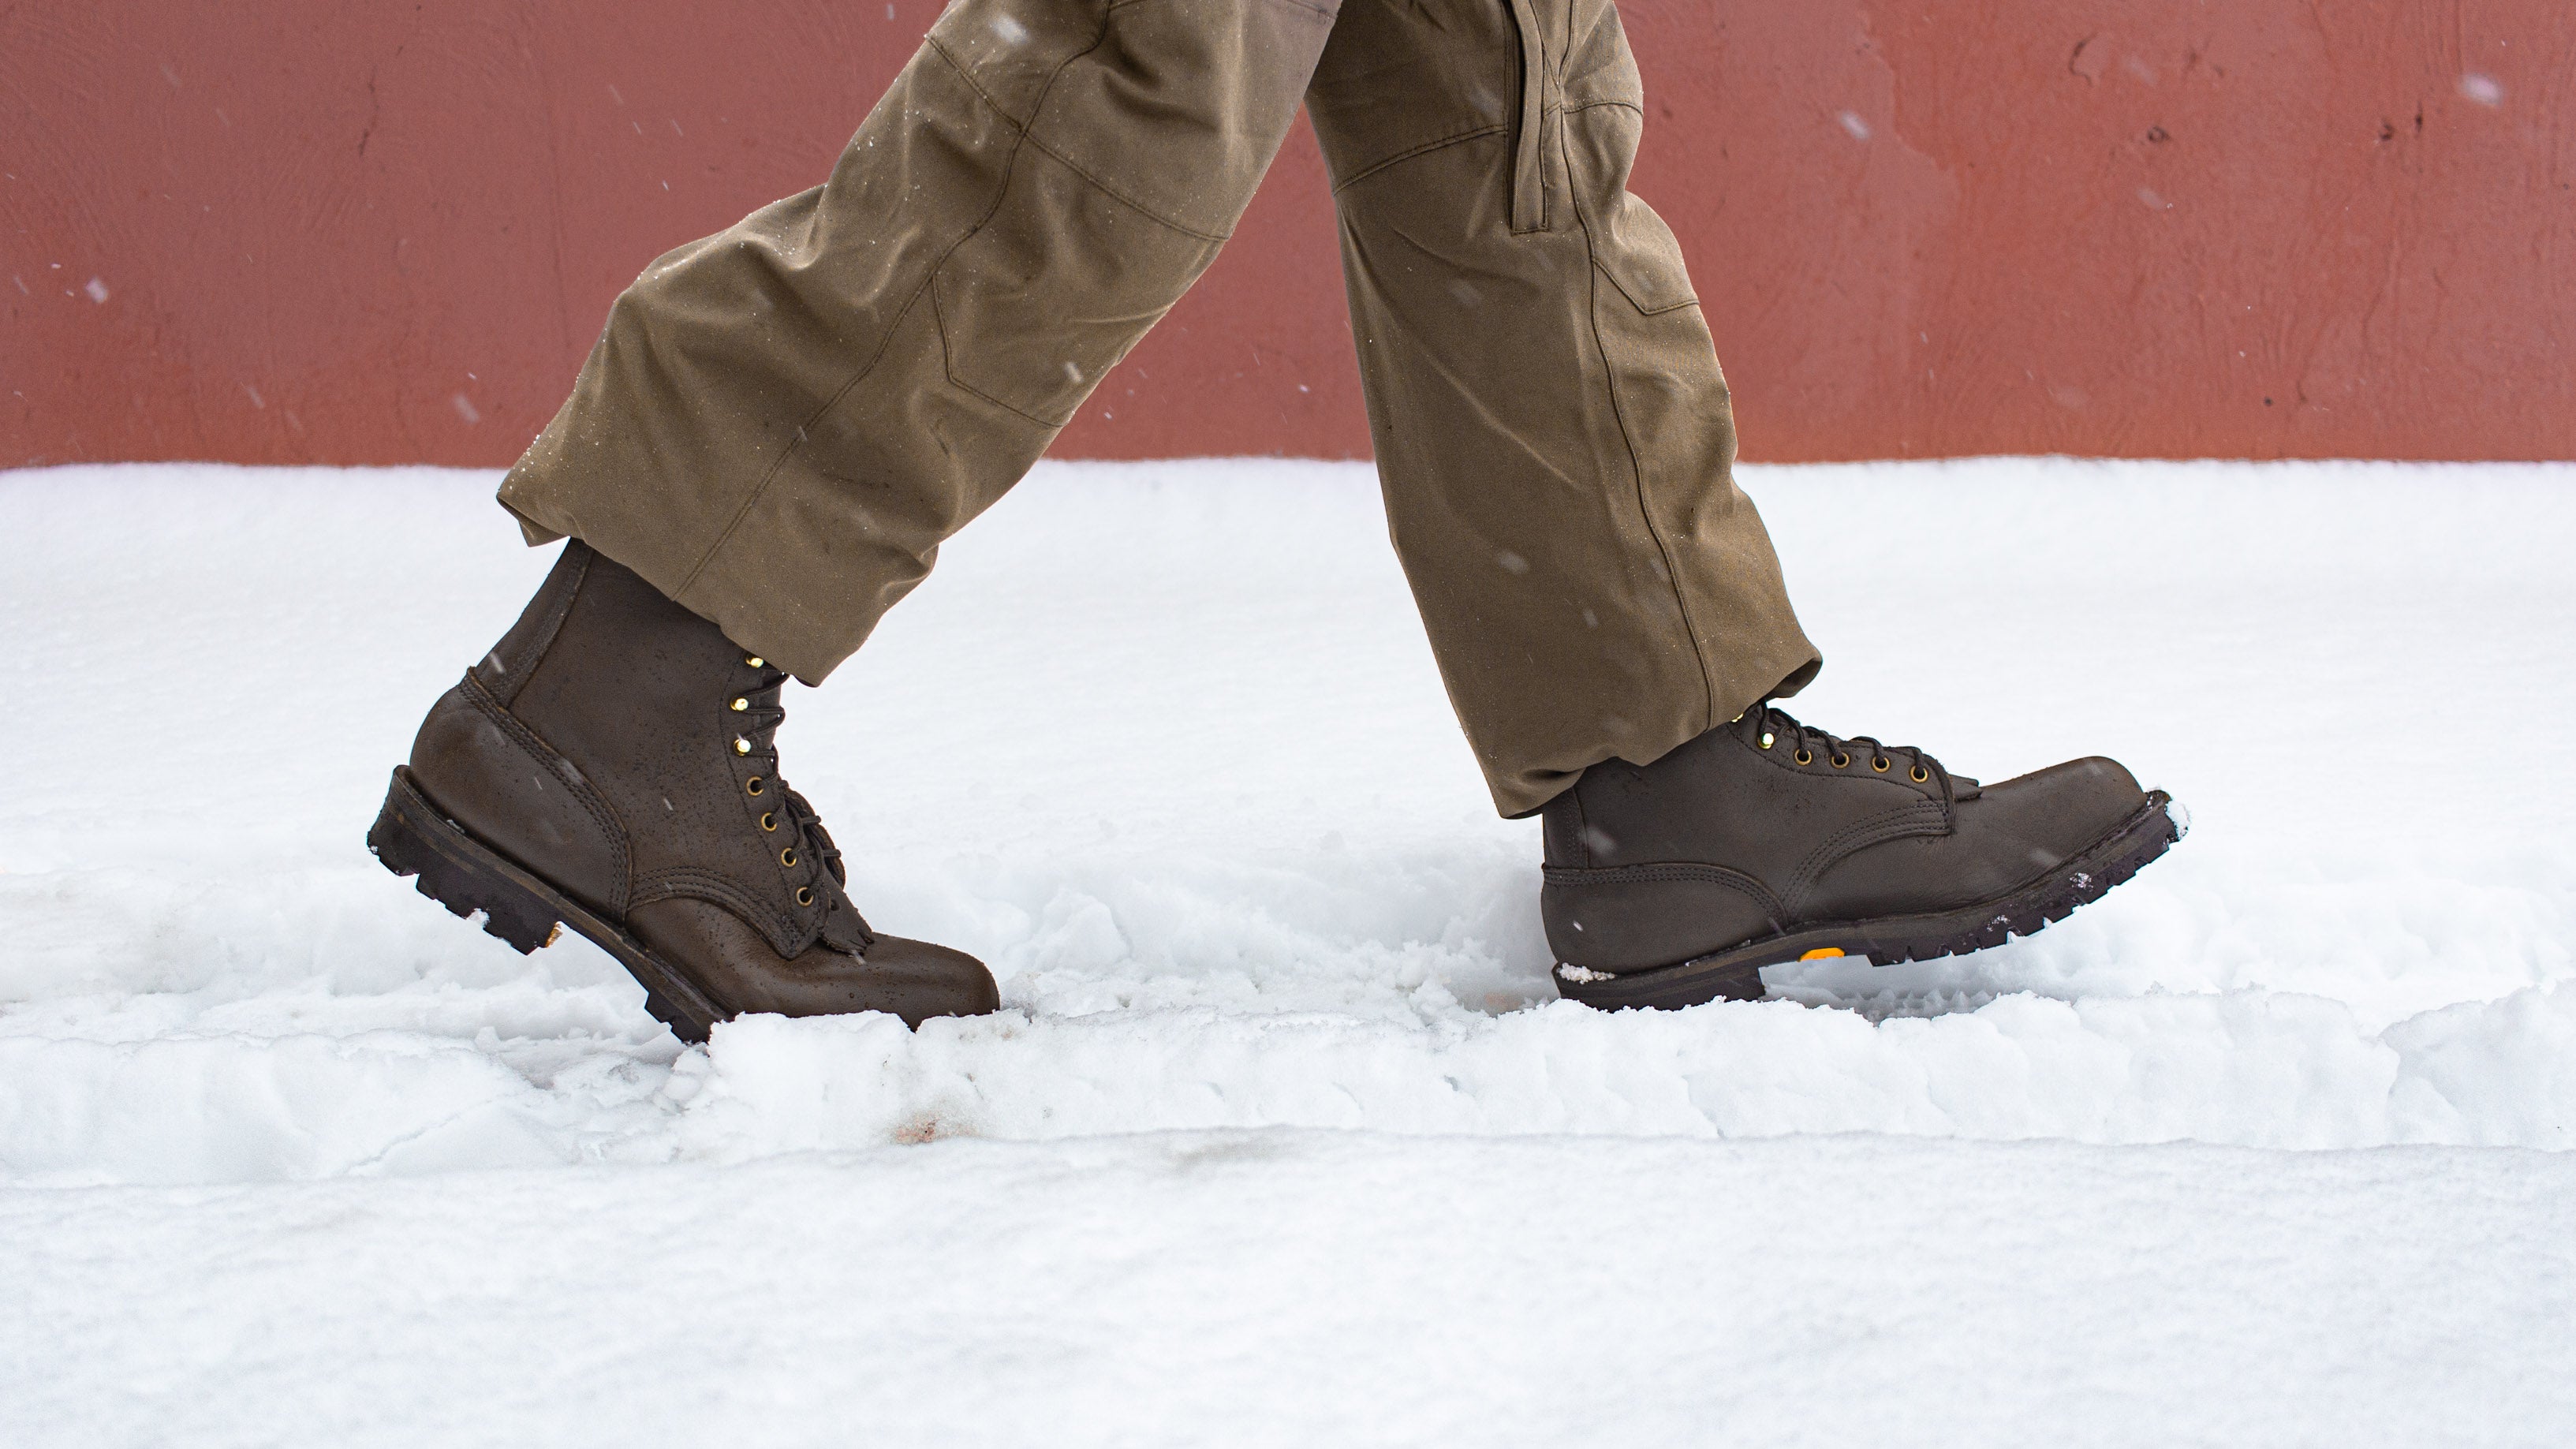 How to make your boots/ shoes water and stain repellent in snow